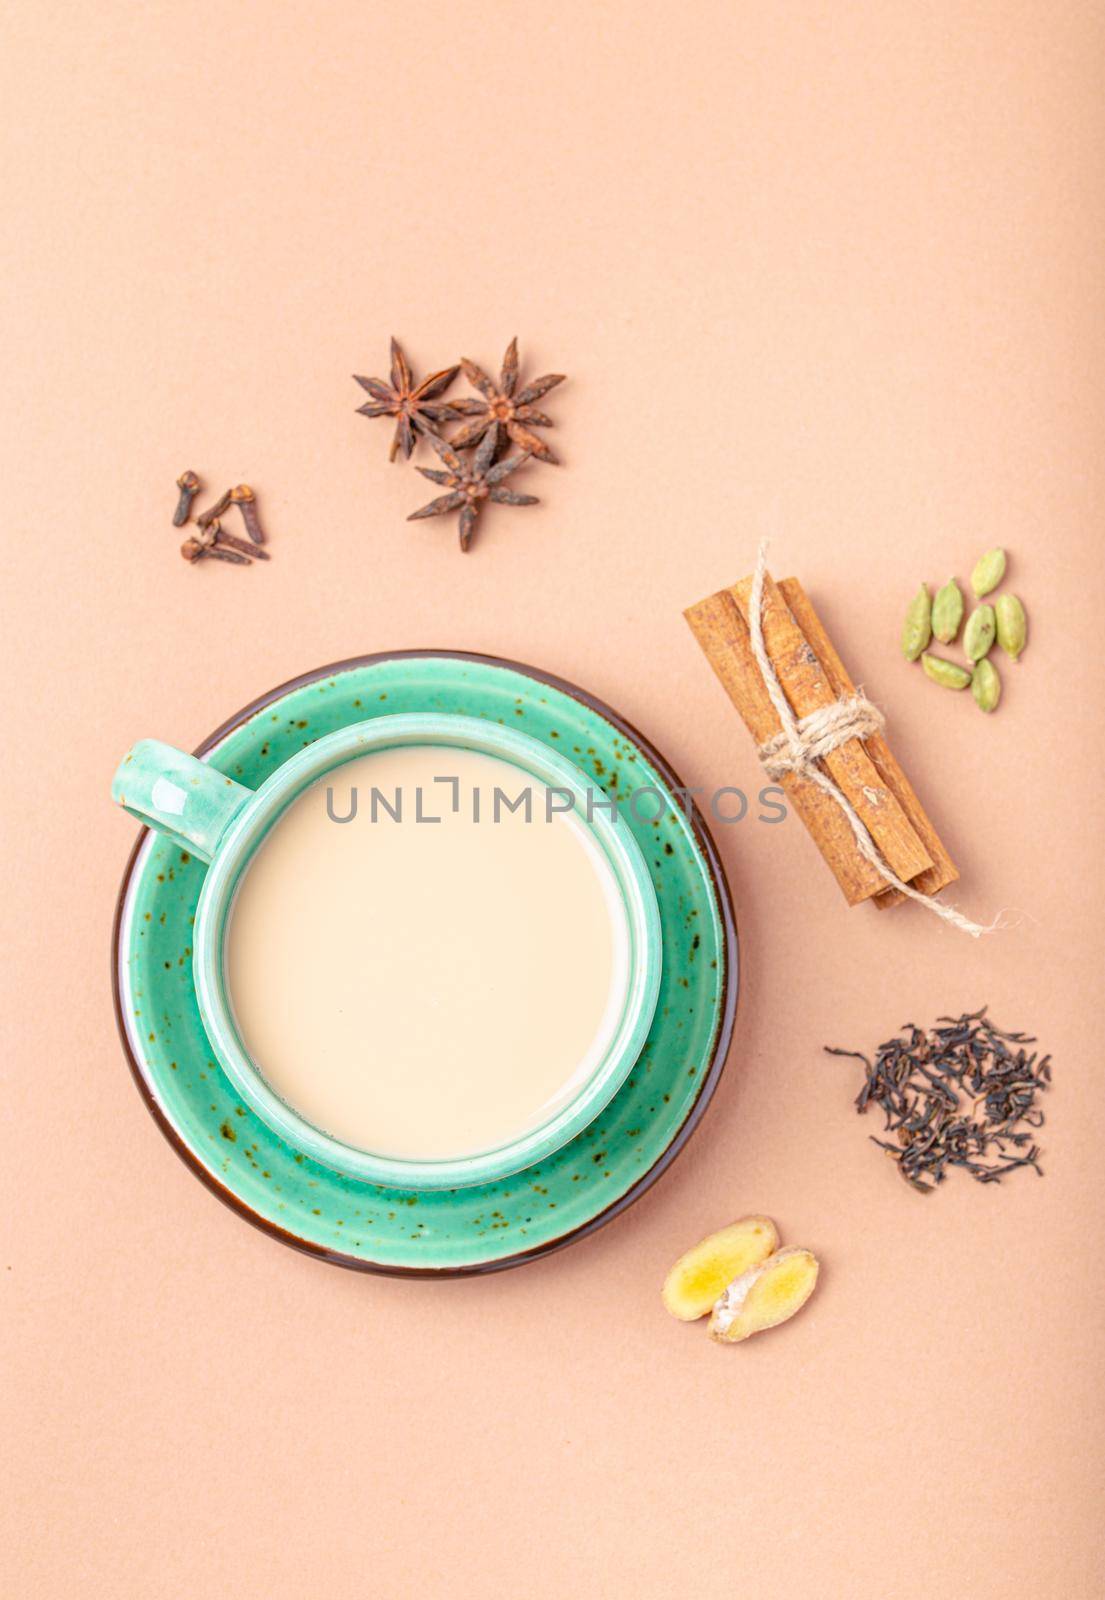 Healthy Indian beverage masala chai - tea hot drink with milk and spices in rustic green teacup with ingredients for making masala chai from above on simple beige minimal background